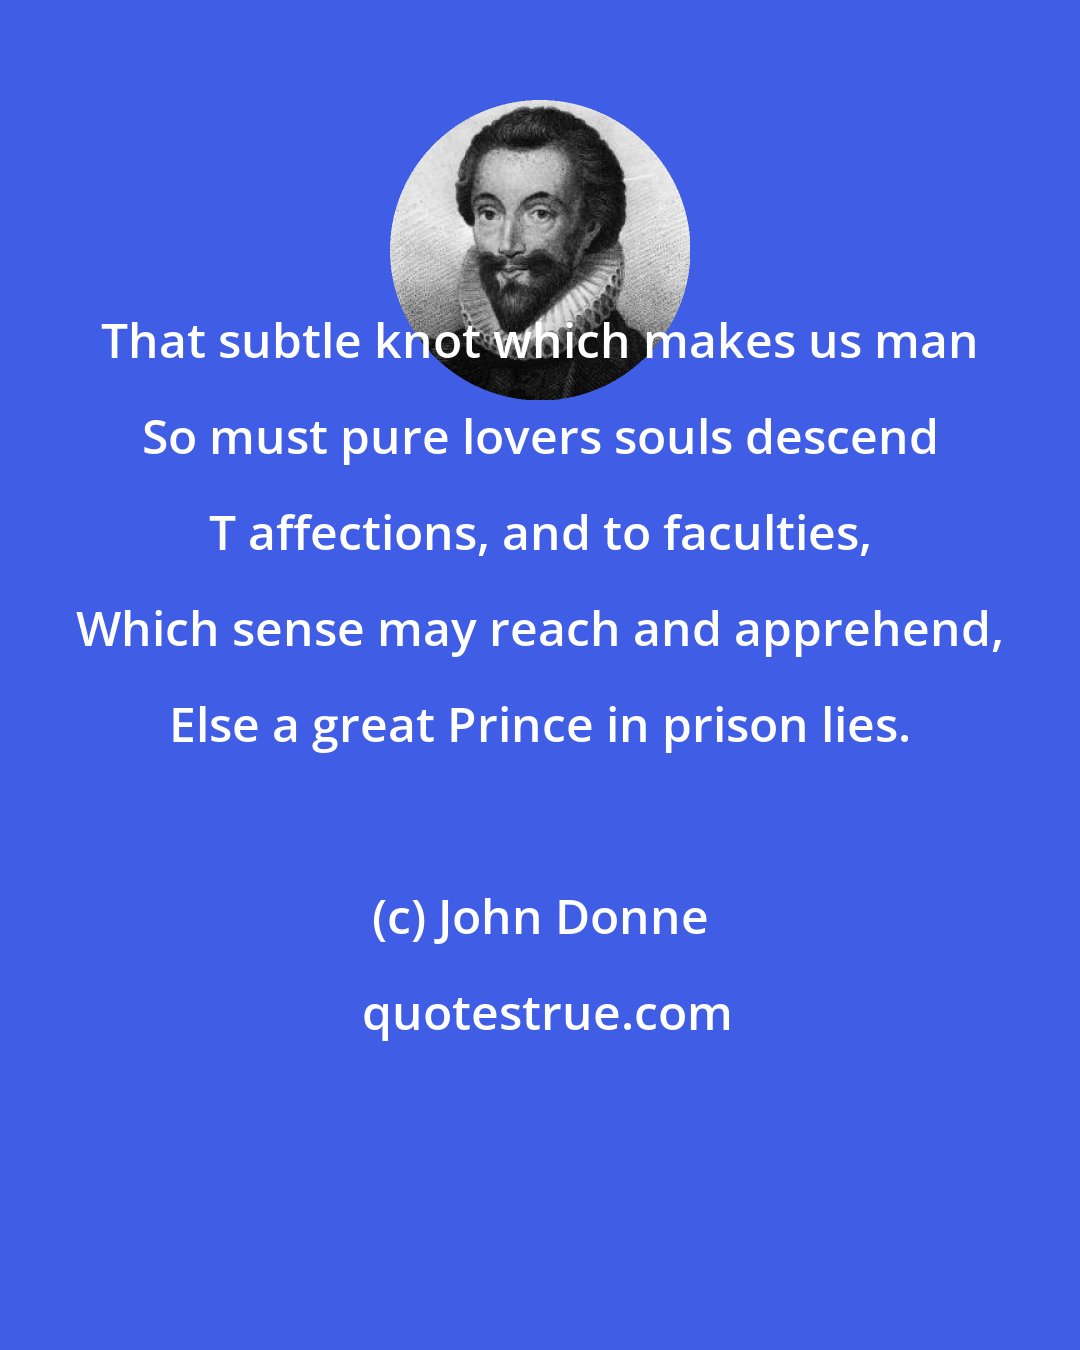 John Donne: That subtle knot which makes us man So must pure lovers souls descend T affections, and to faculties, Which sense may reach and apprehend, Else a great Prince in prison lies.